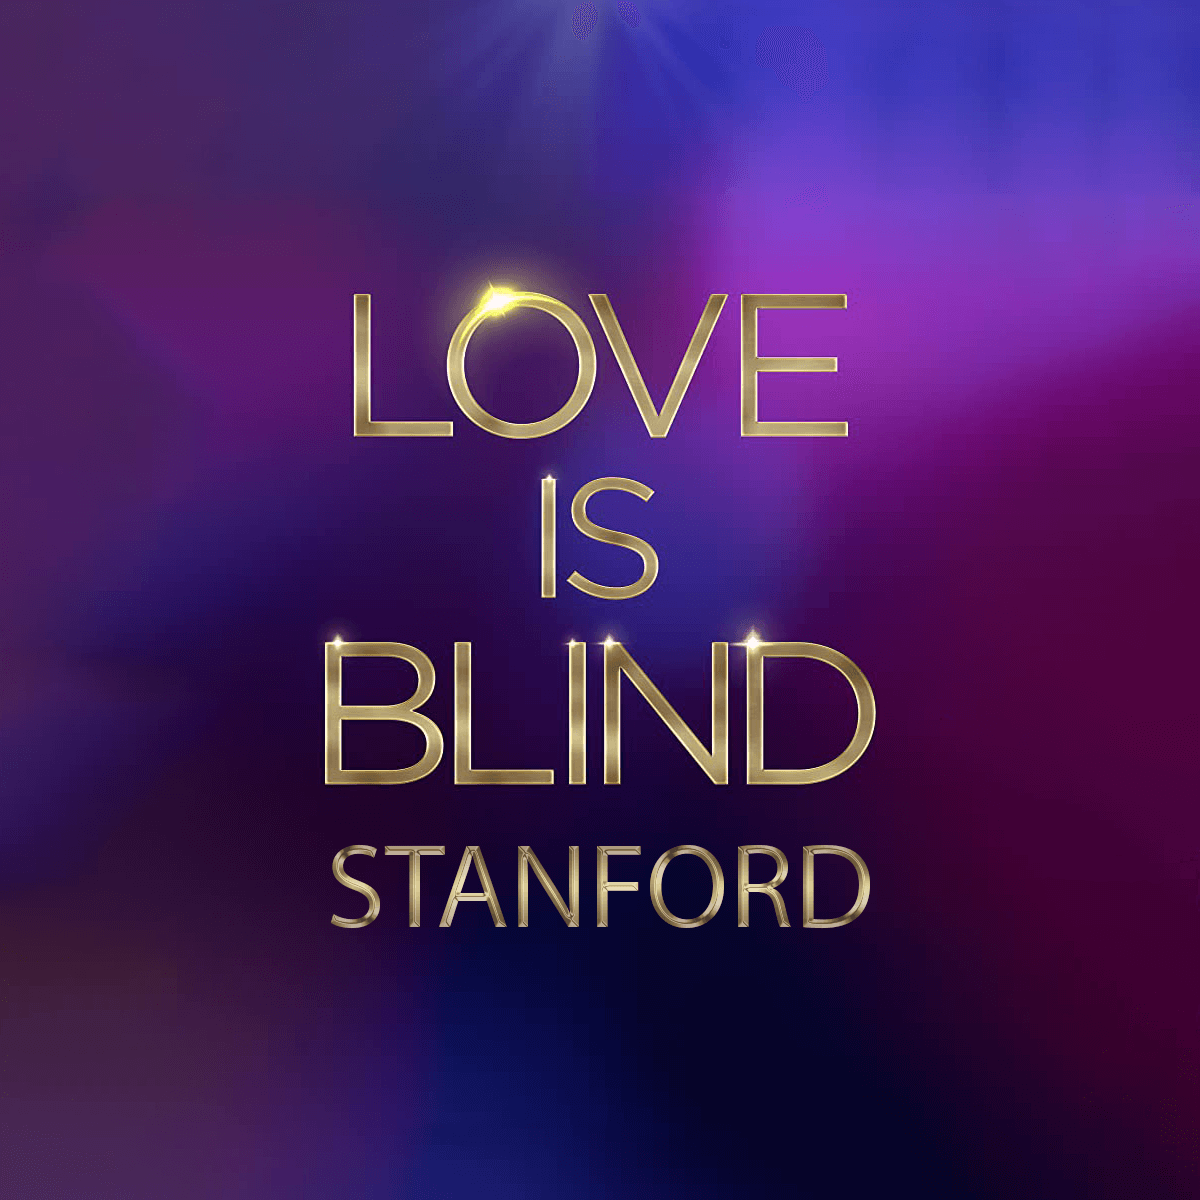 Love Is Blind Stanford